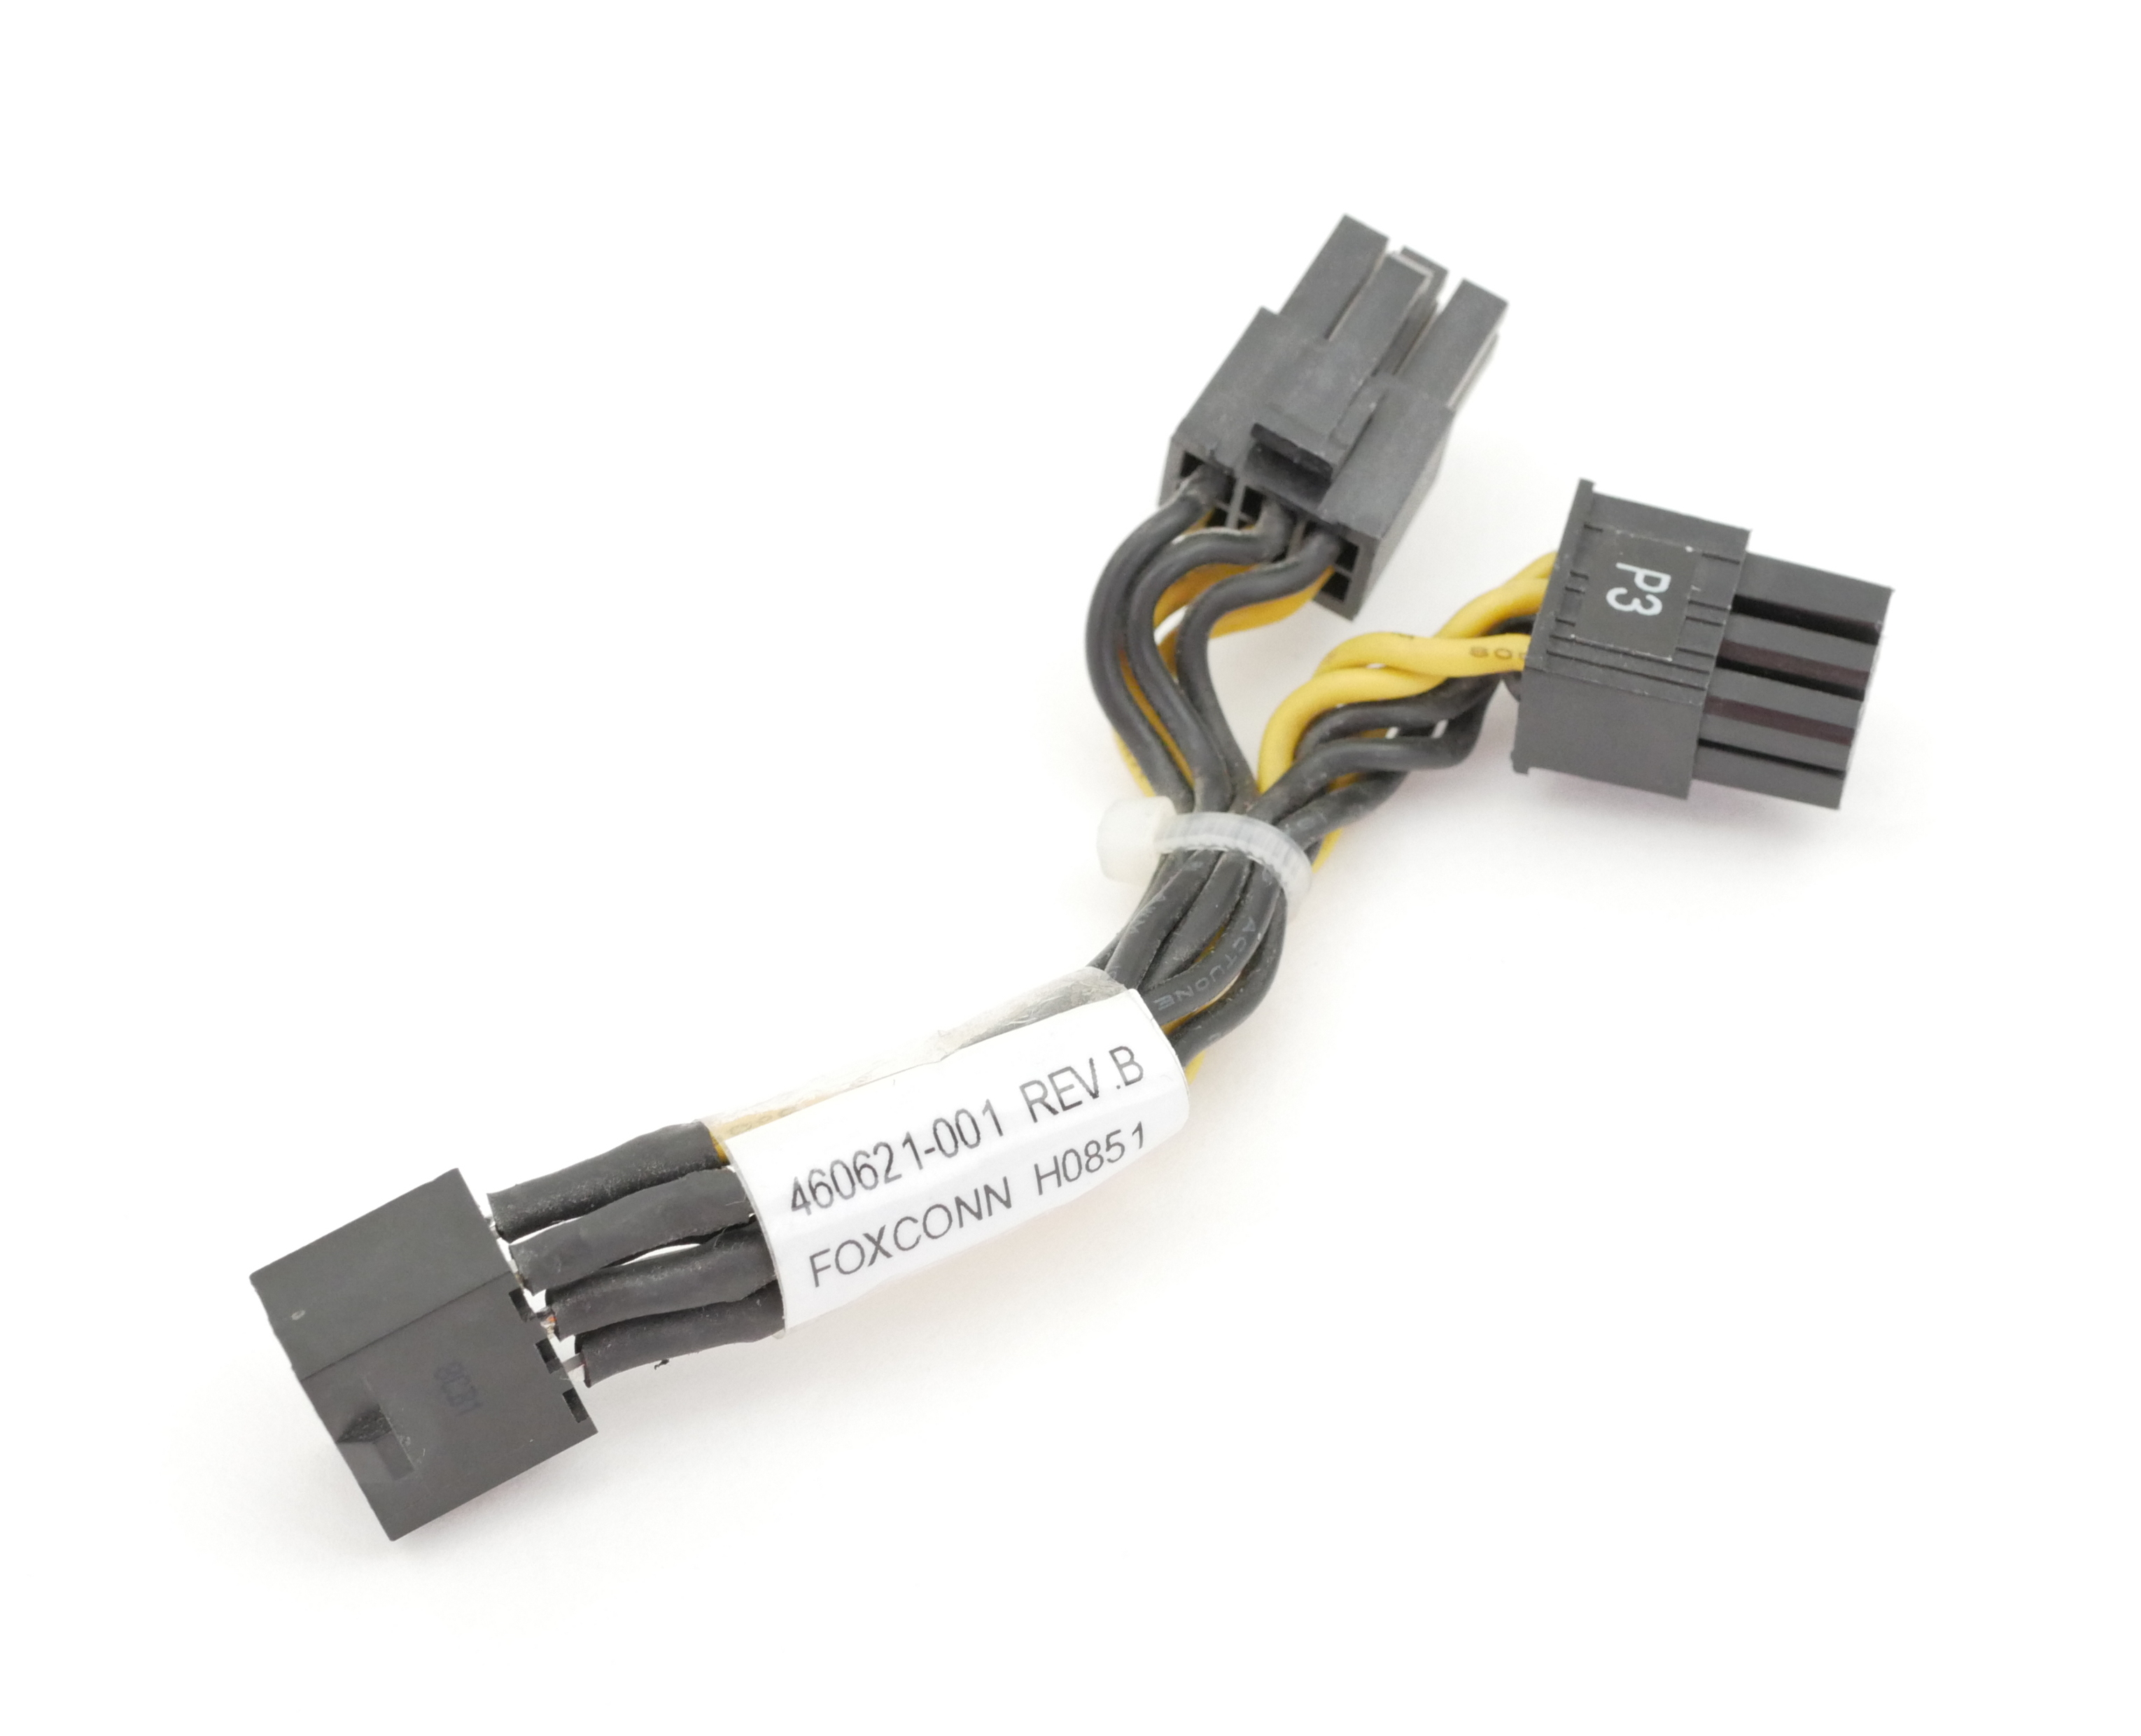 HP Foxconn GPU Power Cable for 4" 6pin to Dual 6pin 460621-001 - Click Image to Close